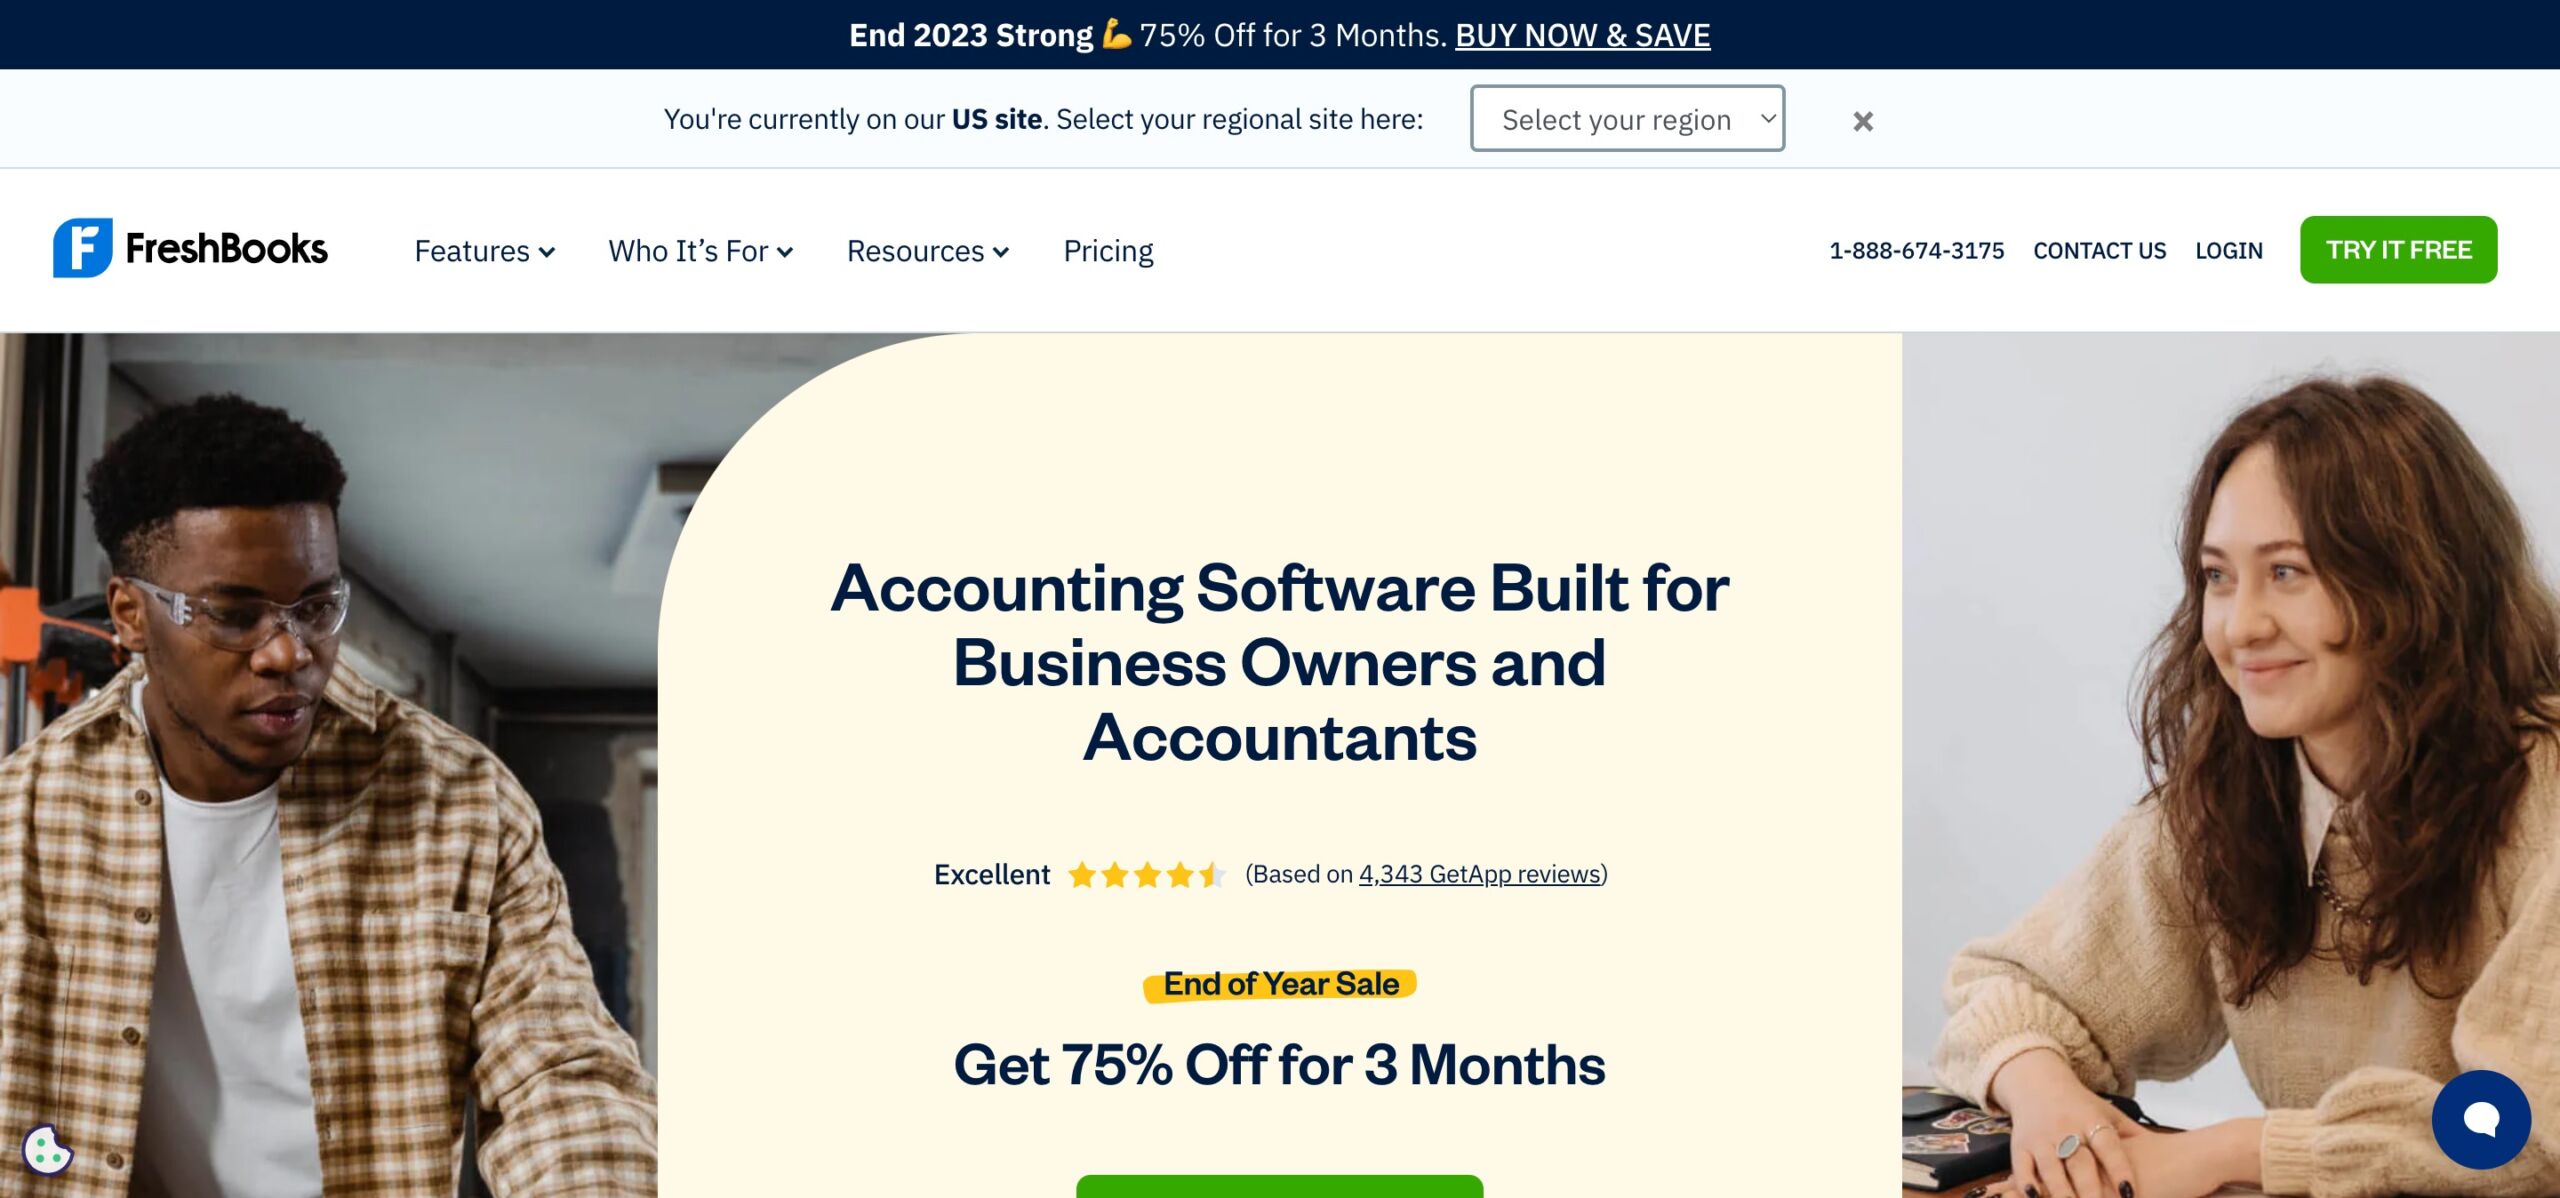 Freshbooks Invoice and Accounting Software